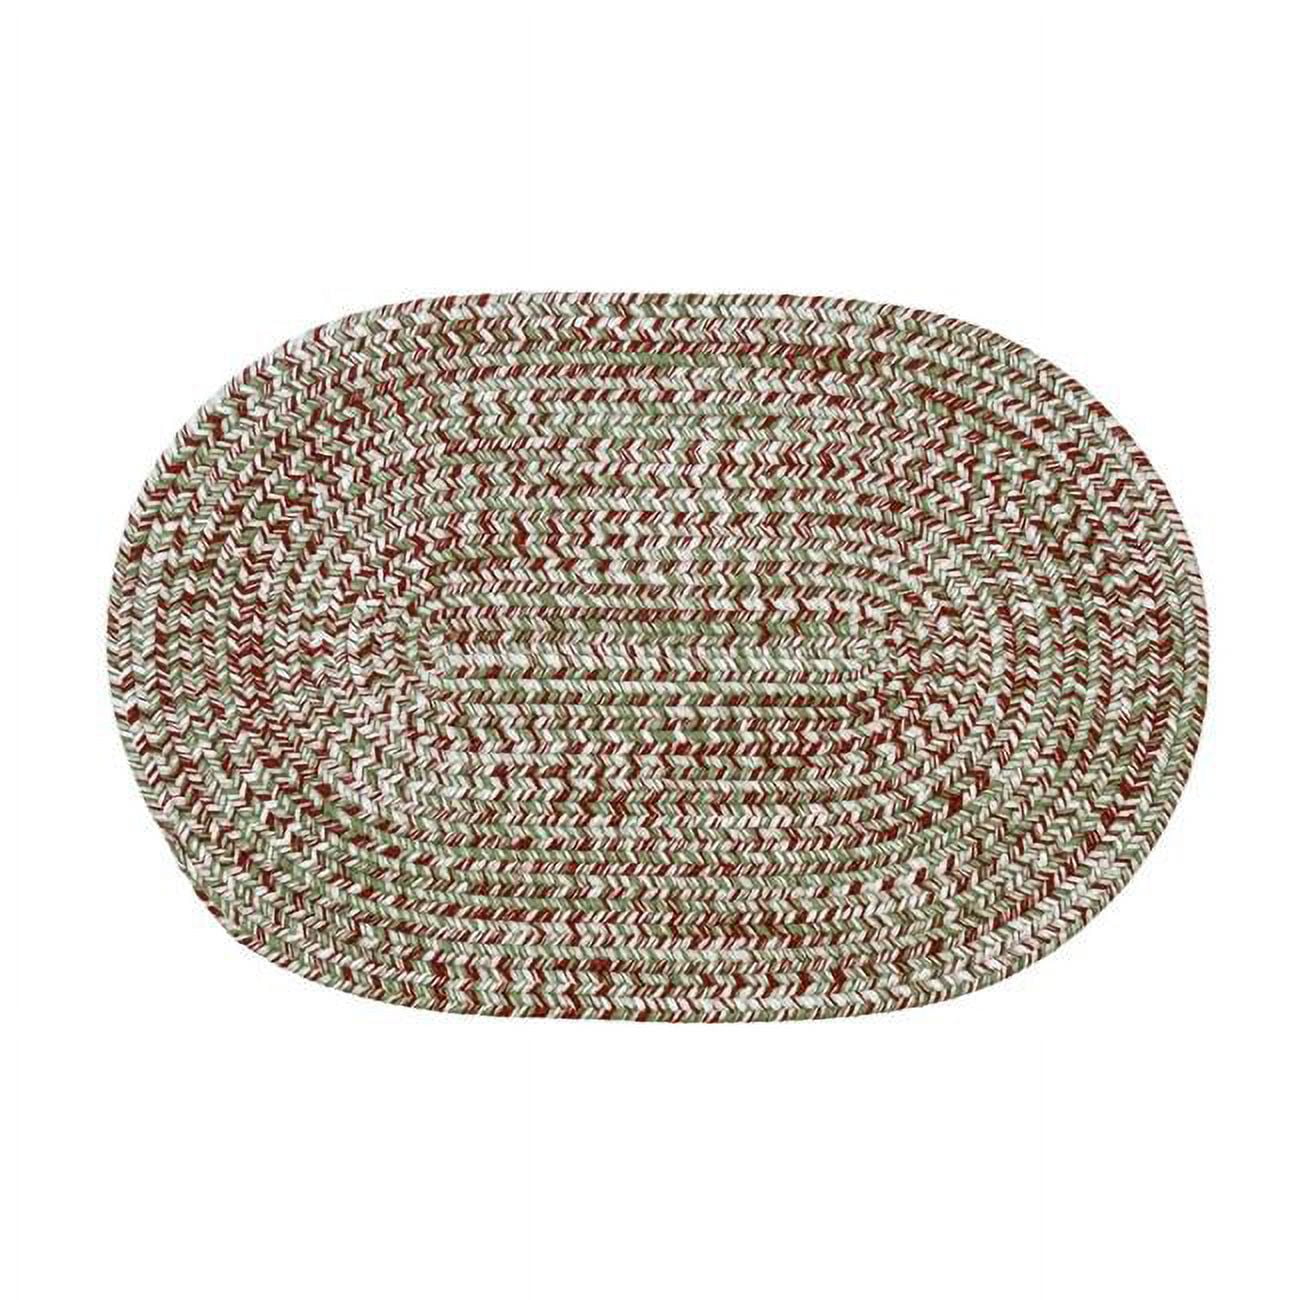 Designs-Done-Right 34 x 58 in. Christmas Braided Tweed Oval Rug - Xmas & Multi Color